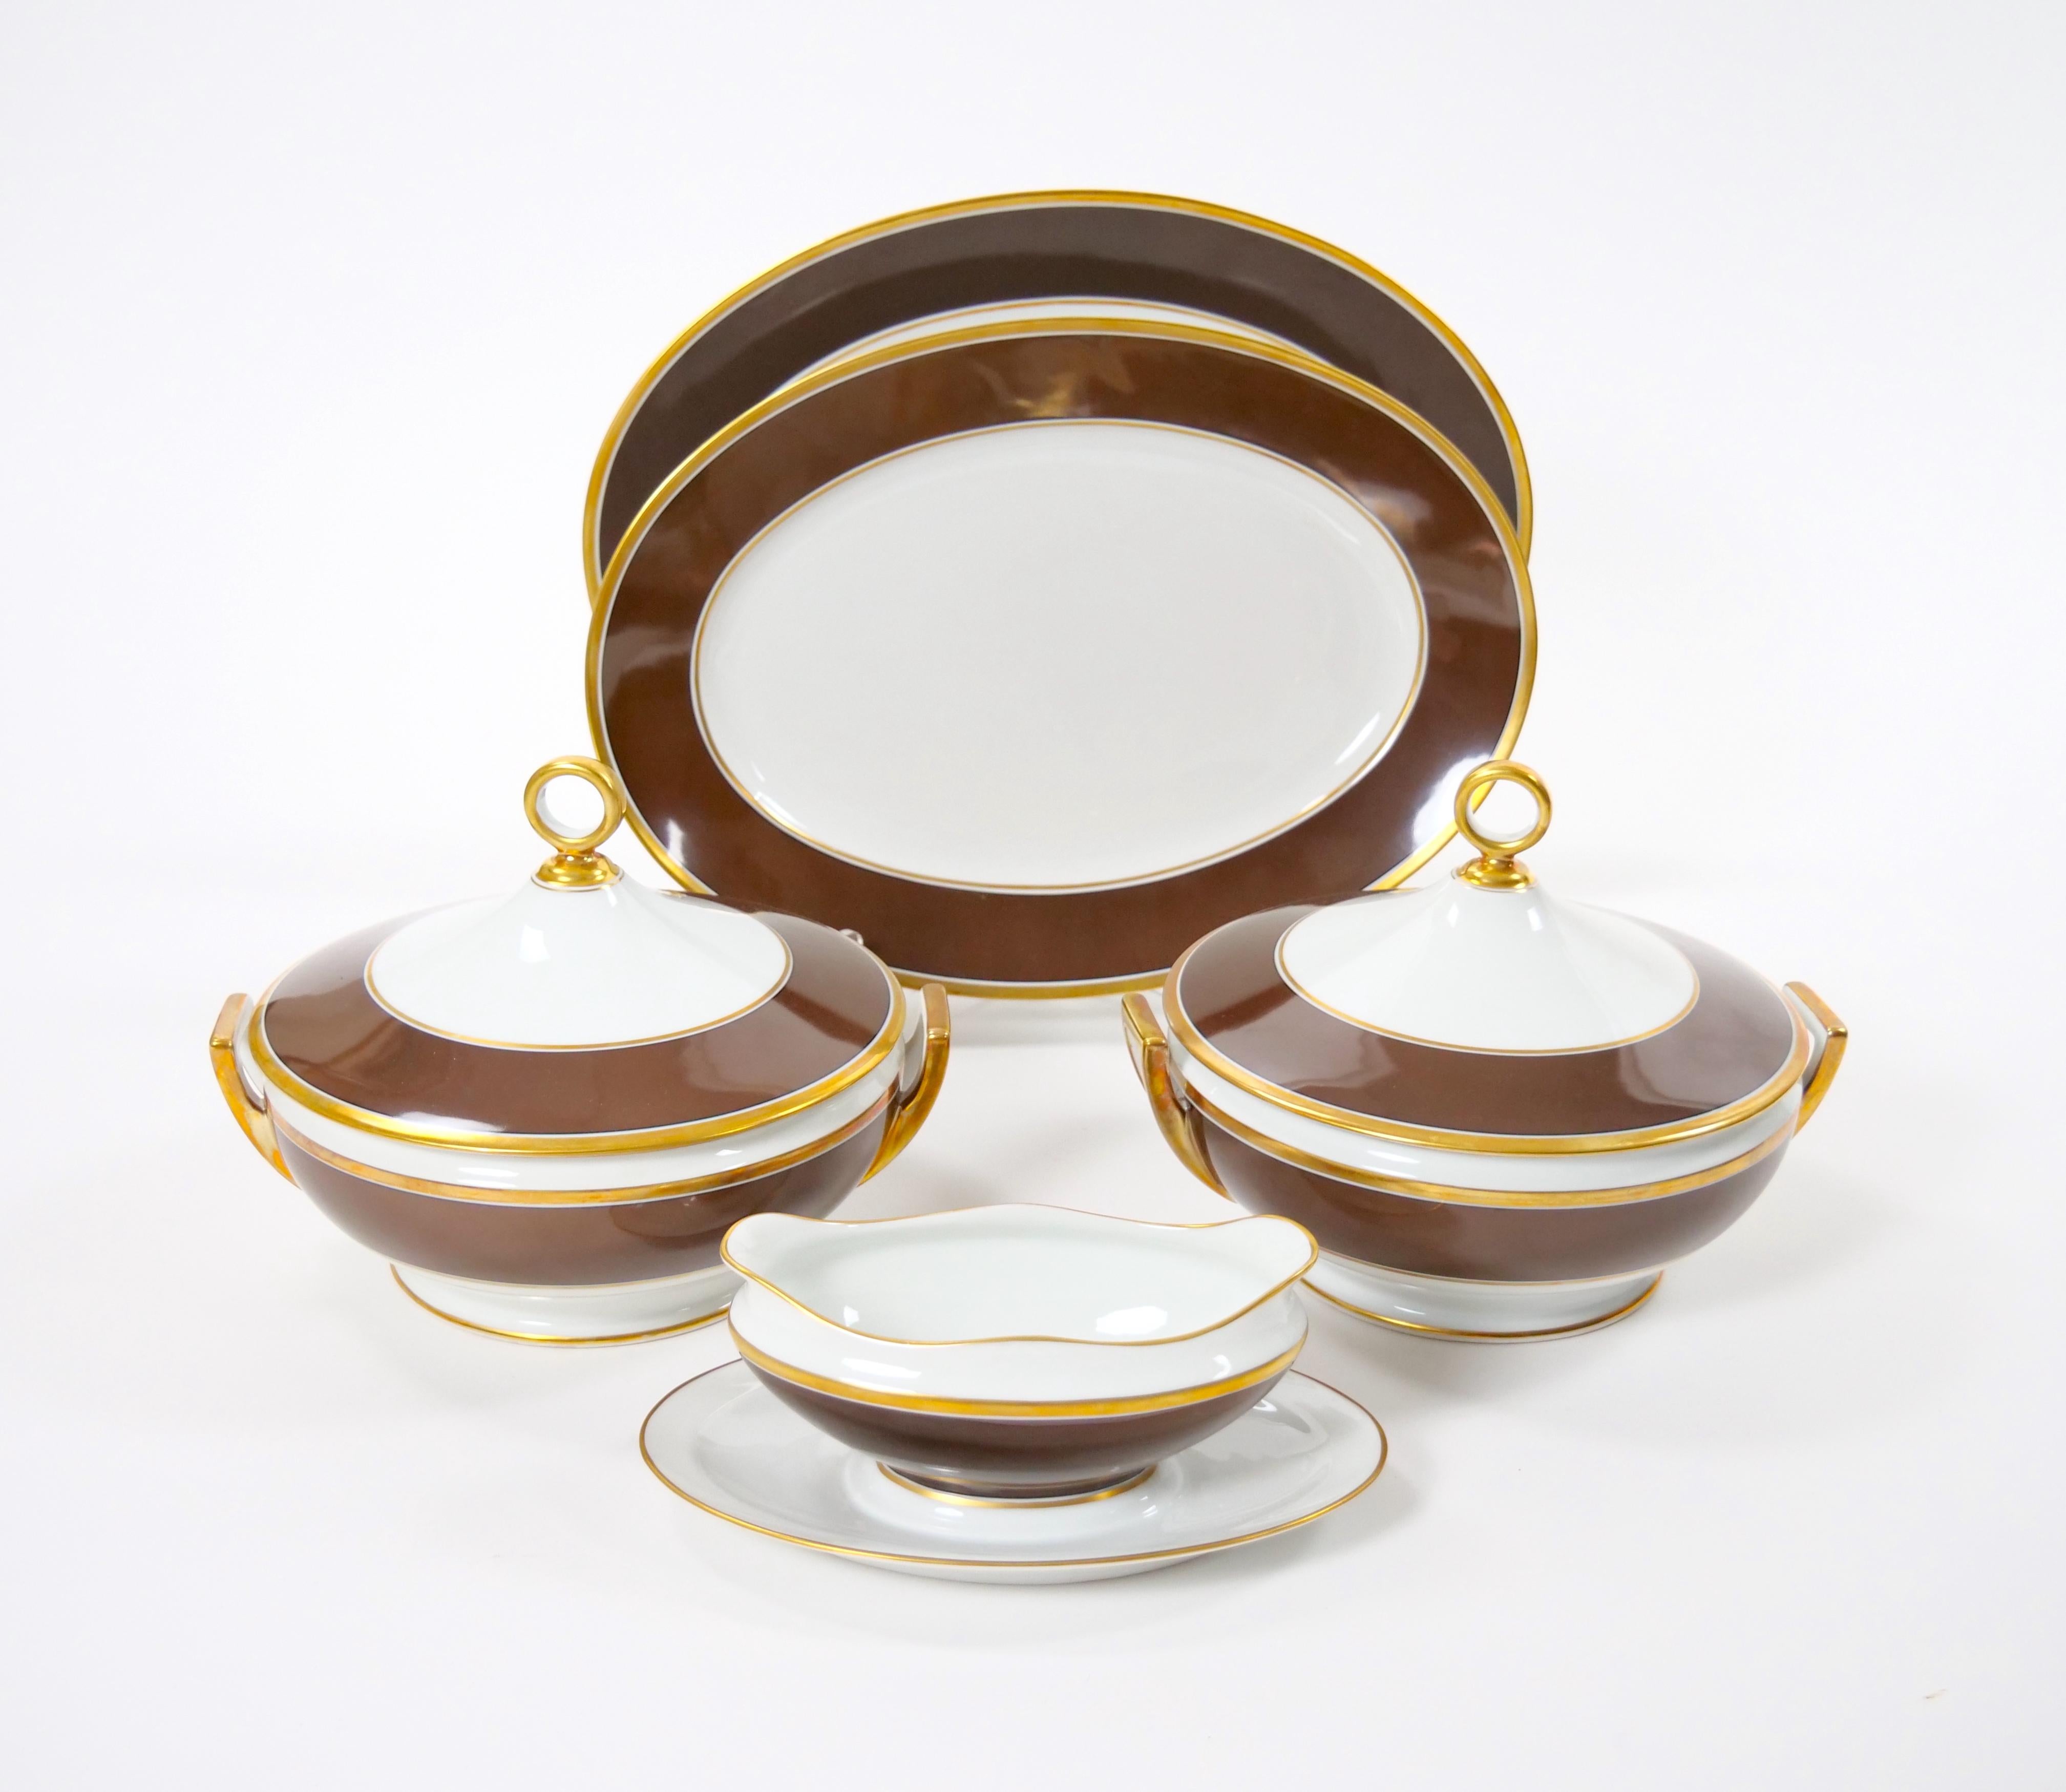 Gilt Richard Ginori Brown & Gold Trimmed Extensive Dinnerware Service Of 99 Pieces For Sale